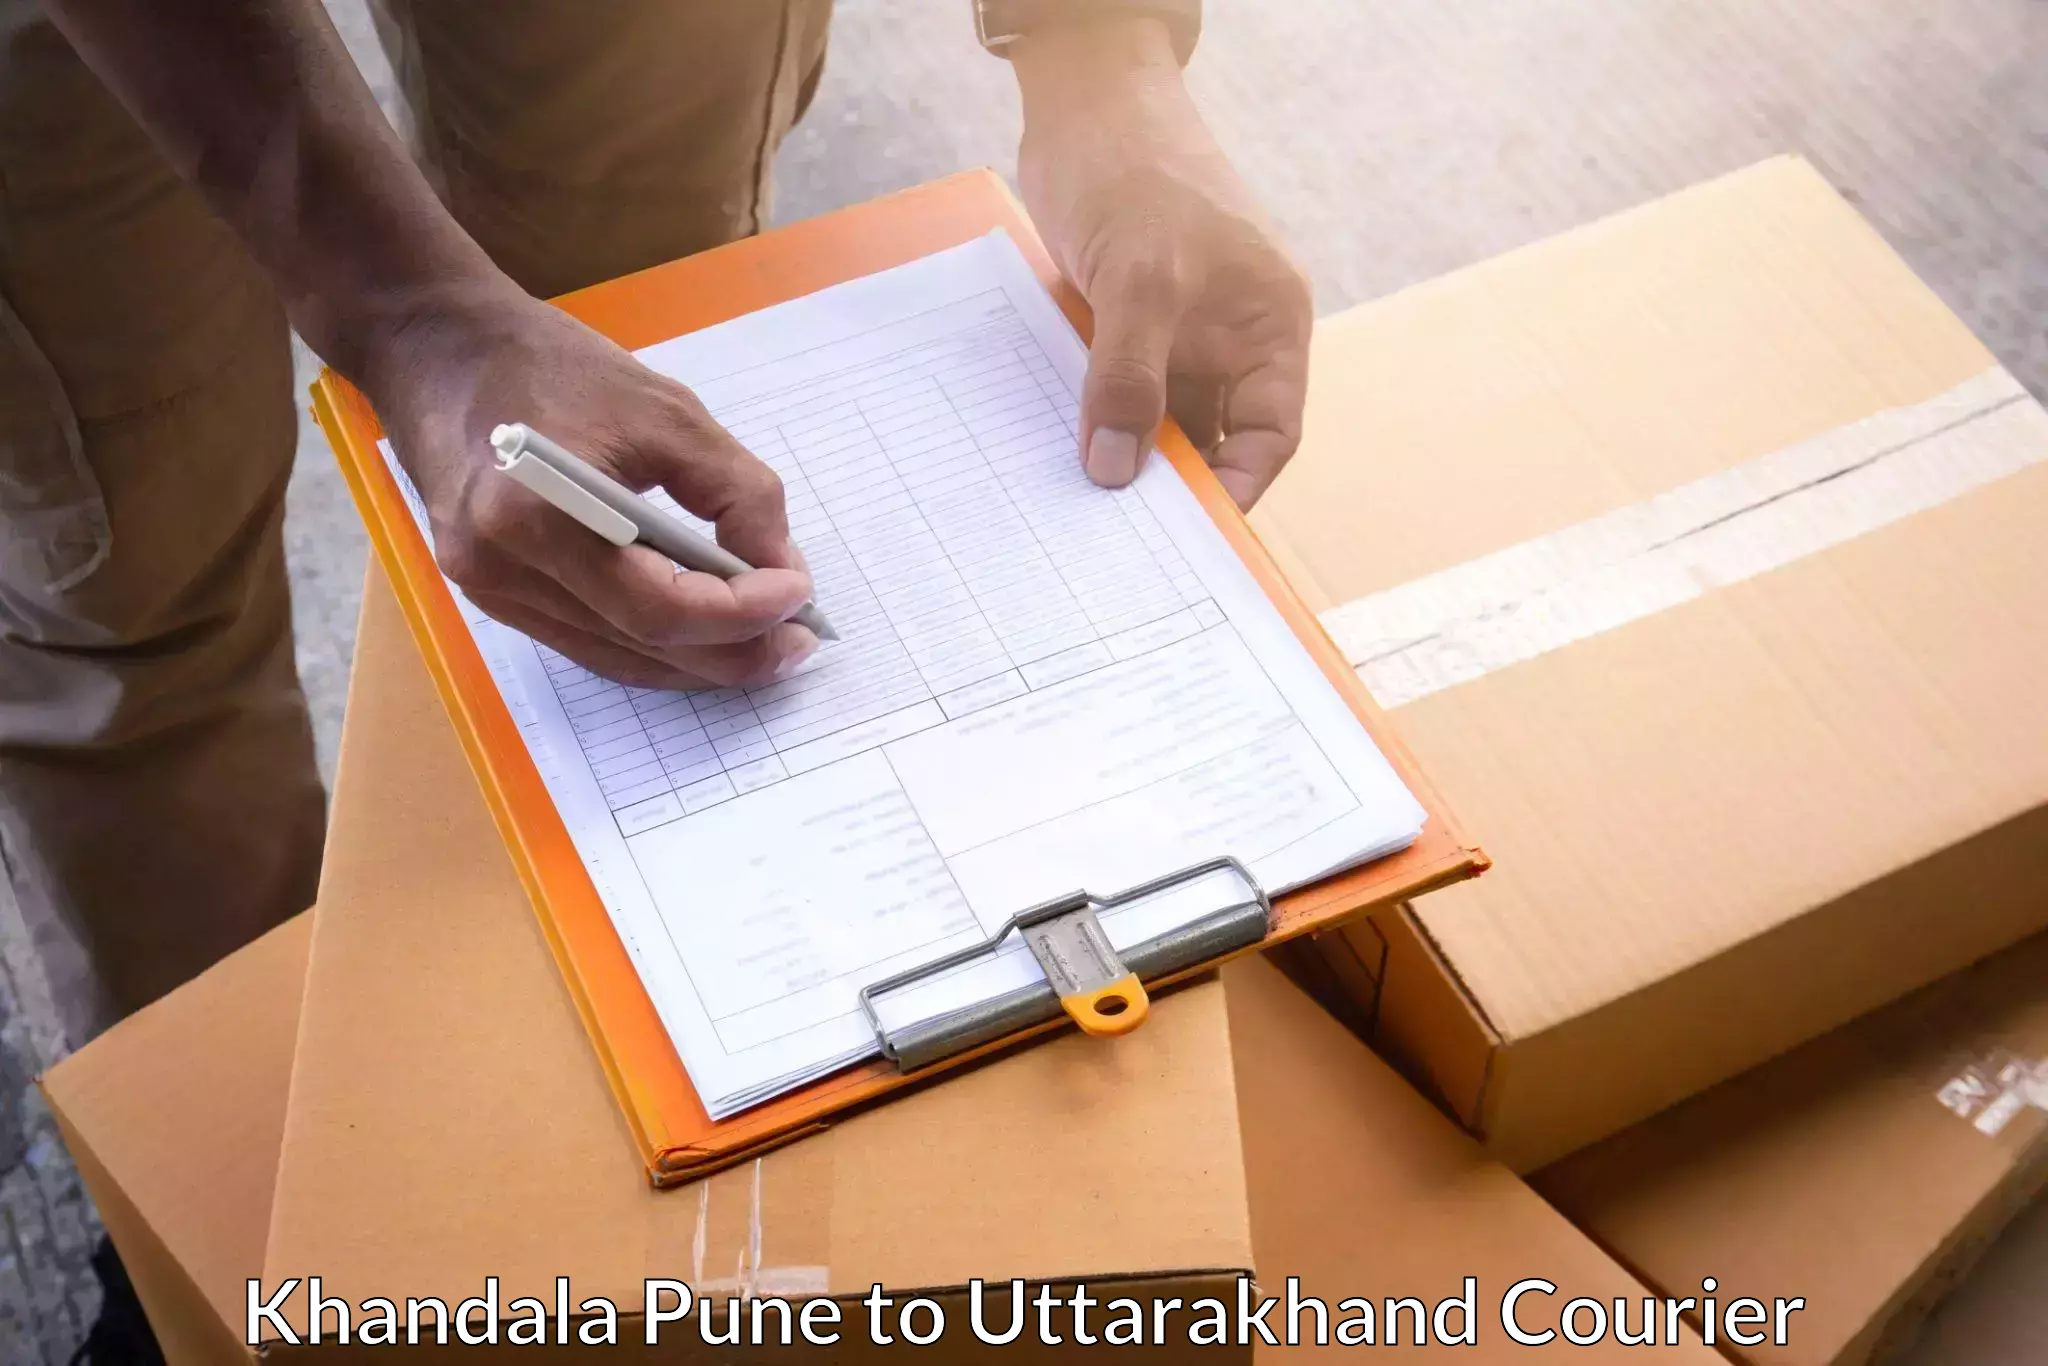 Courier service booking Khandala Pune to Roorkee